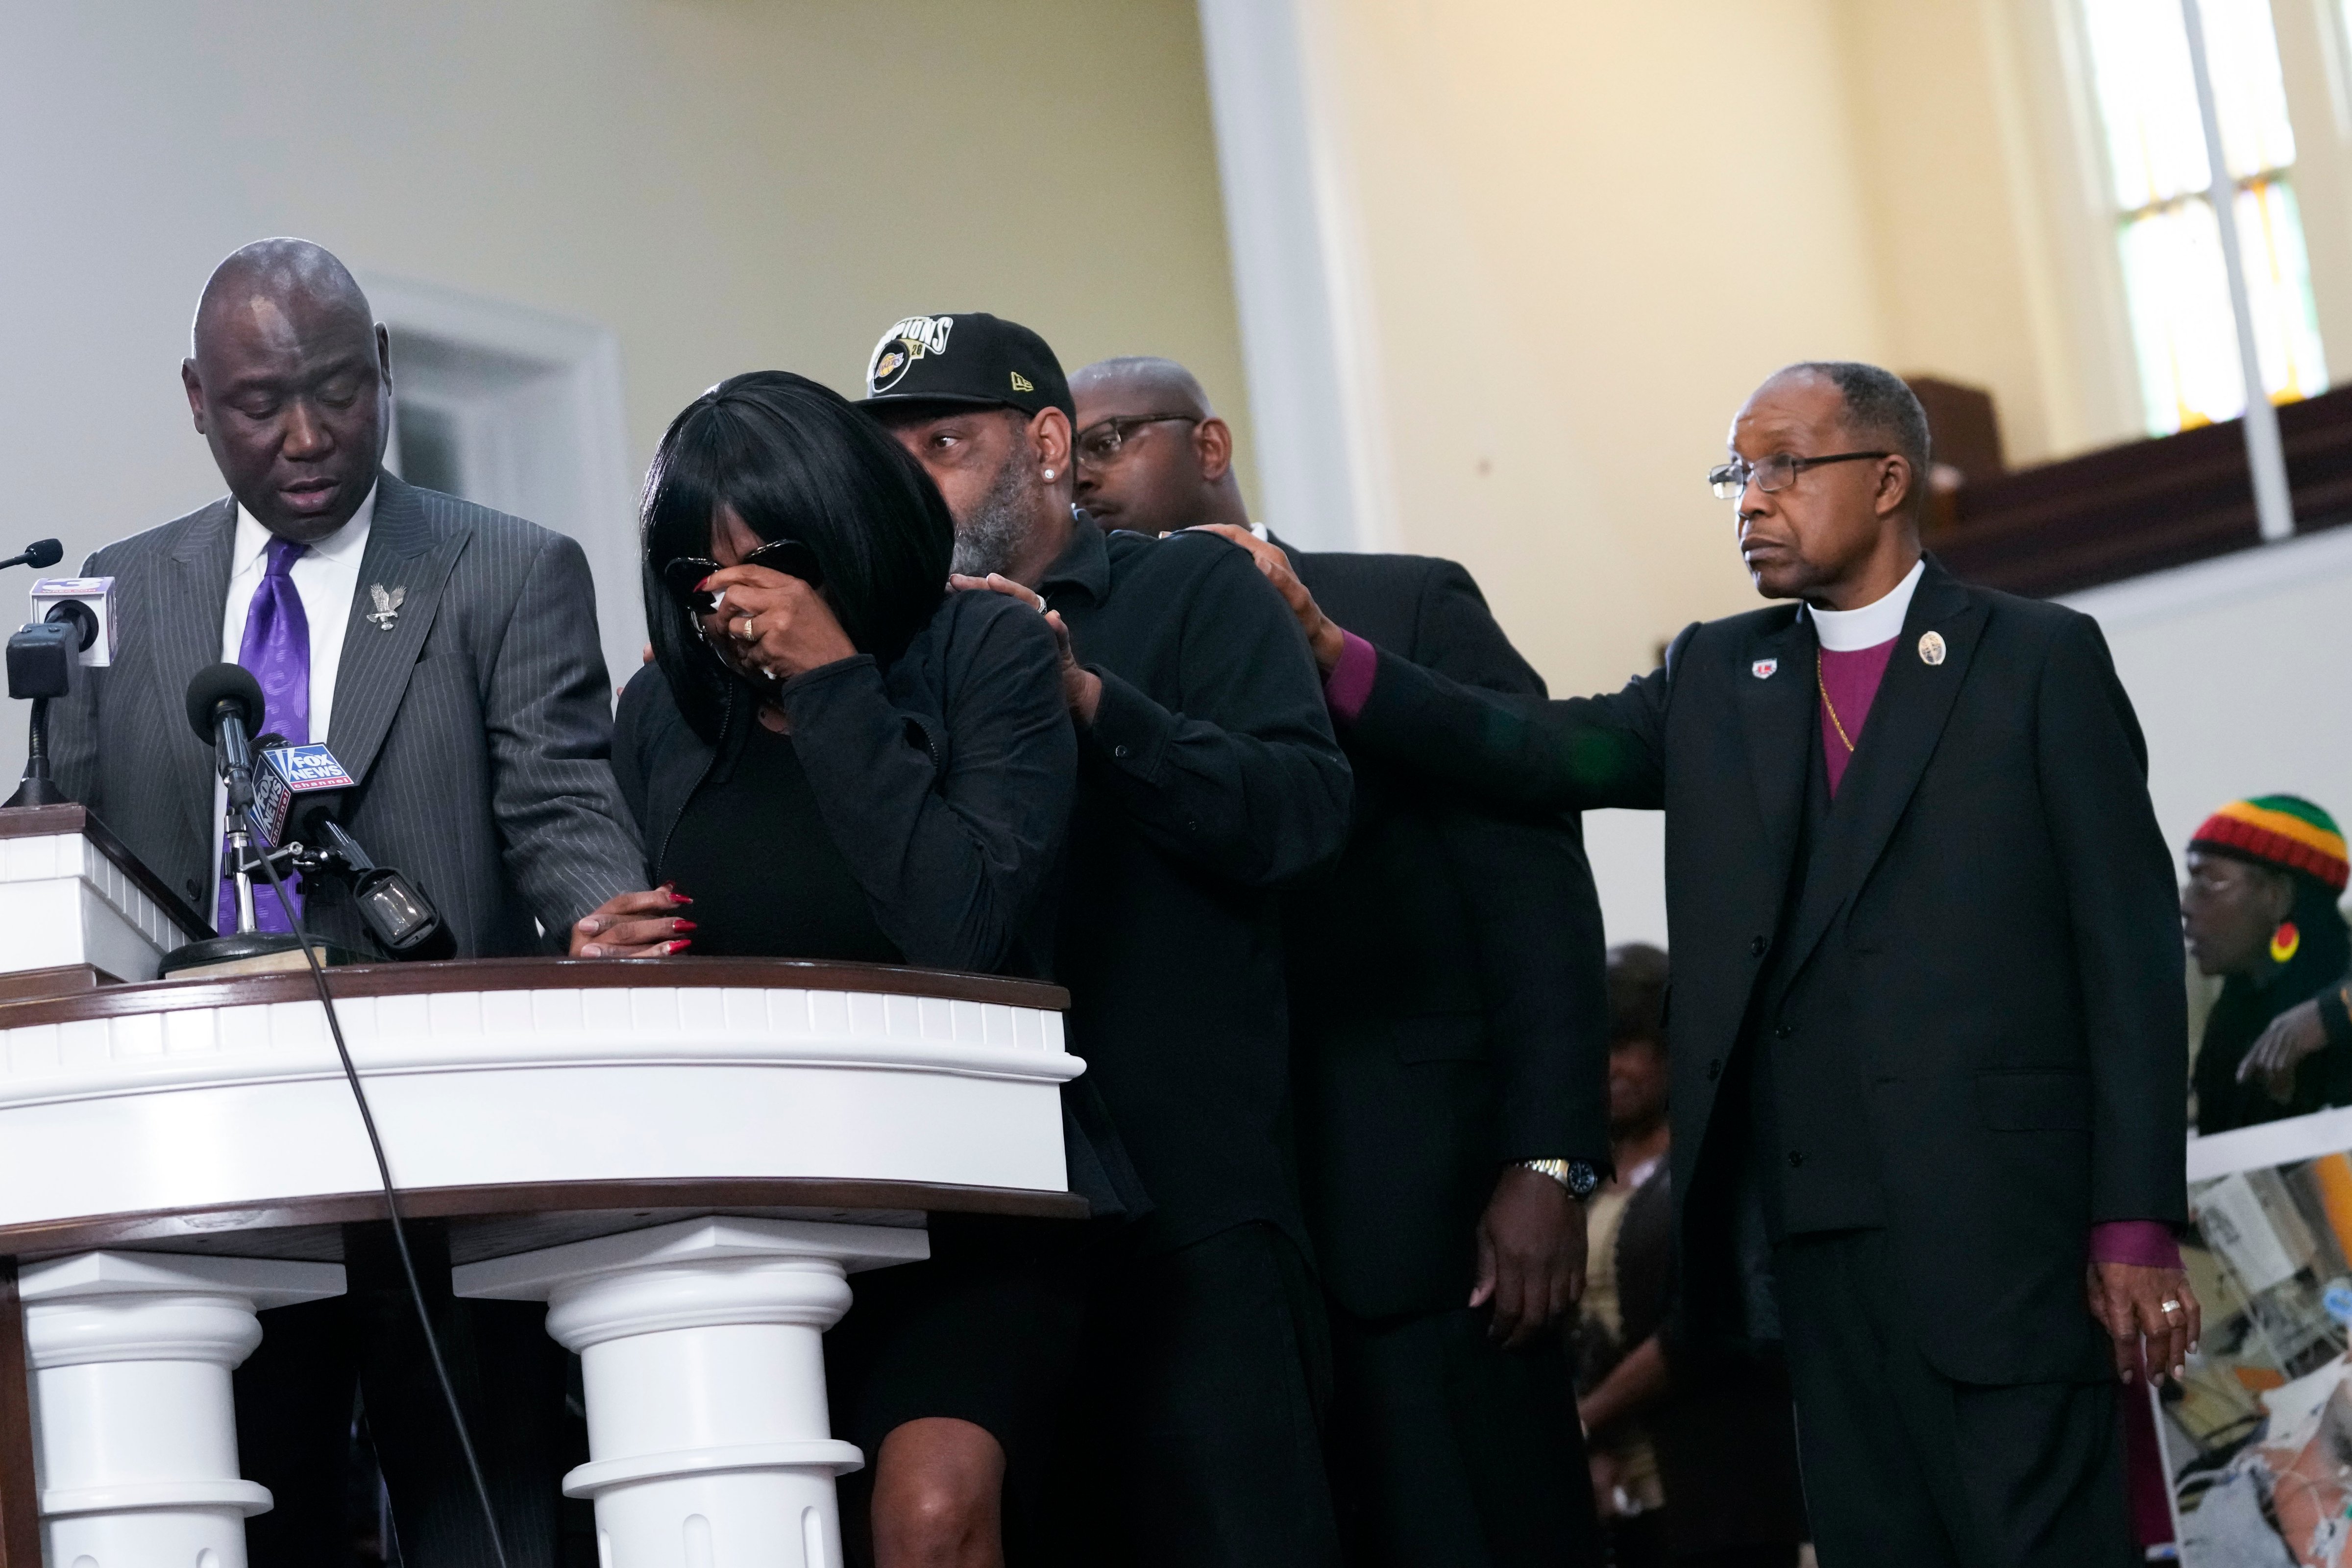 RowVaughn Wells, second from left, mother of Tyre Nichols, who died after being beaten by Memphis police officers, cries as she is comforted by Tyre's stepfather Rodney Wells, behind her, at a news conference with civil rights Attorney Ben Crump, left, in Memphis, Tenn., Monday, Jan. 23, 2023. (AP—Copyright 2023 The Associated Press.)